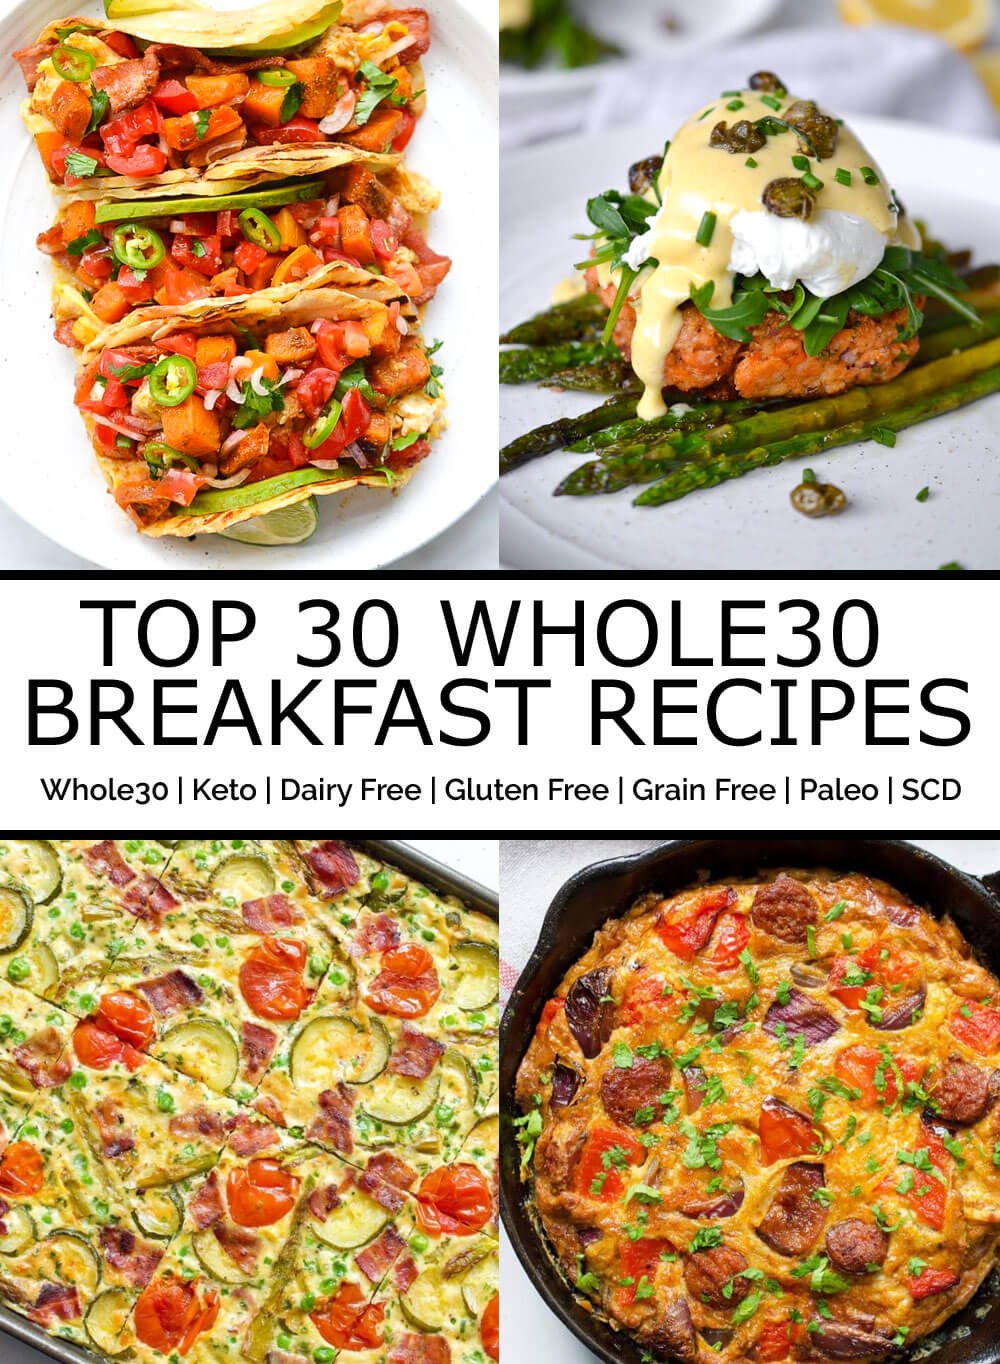 Top 30 Whole30 Breakfasts - Every Last Bite